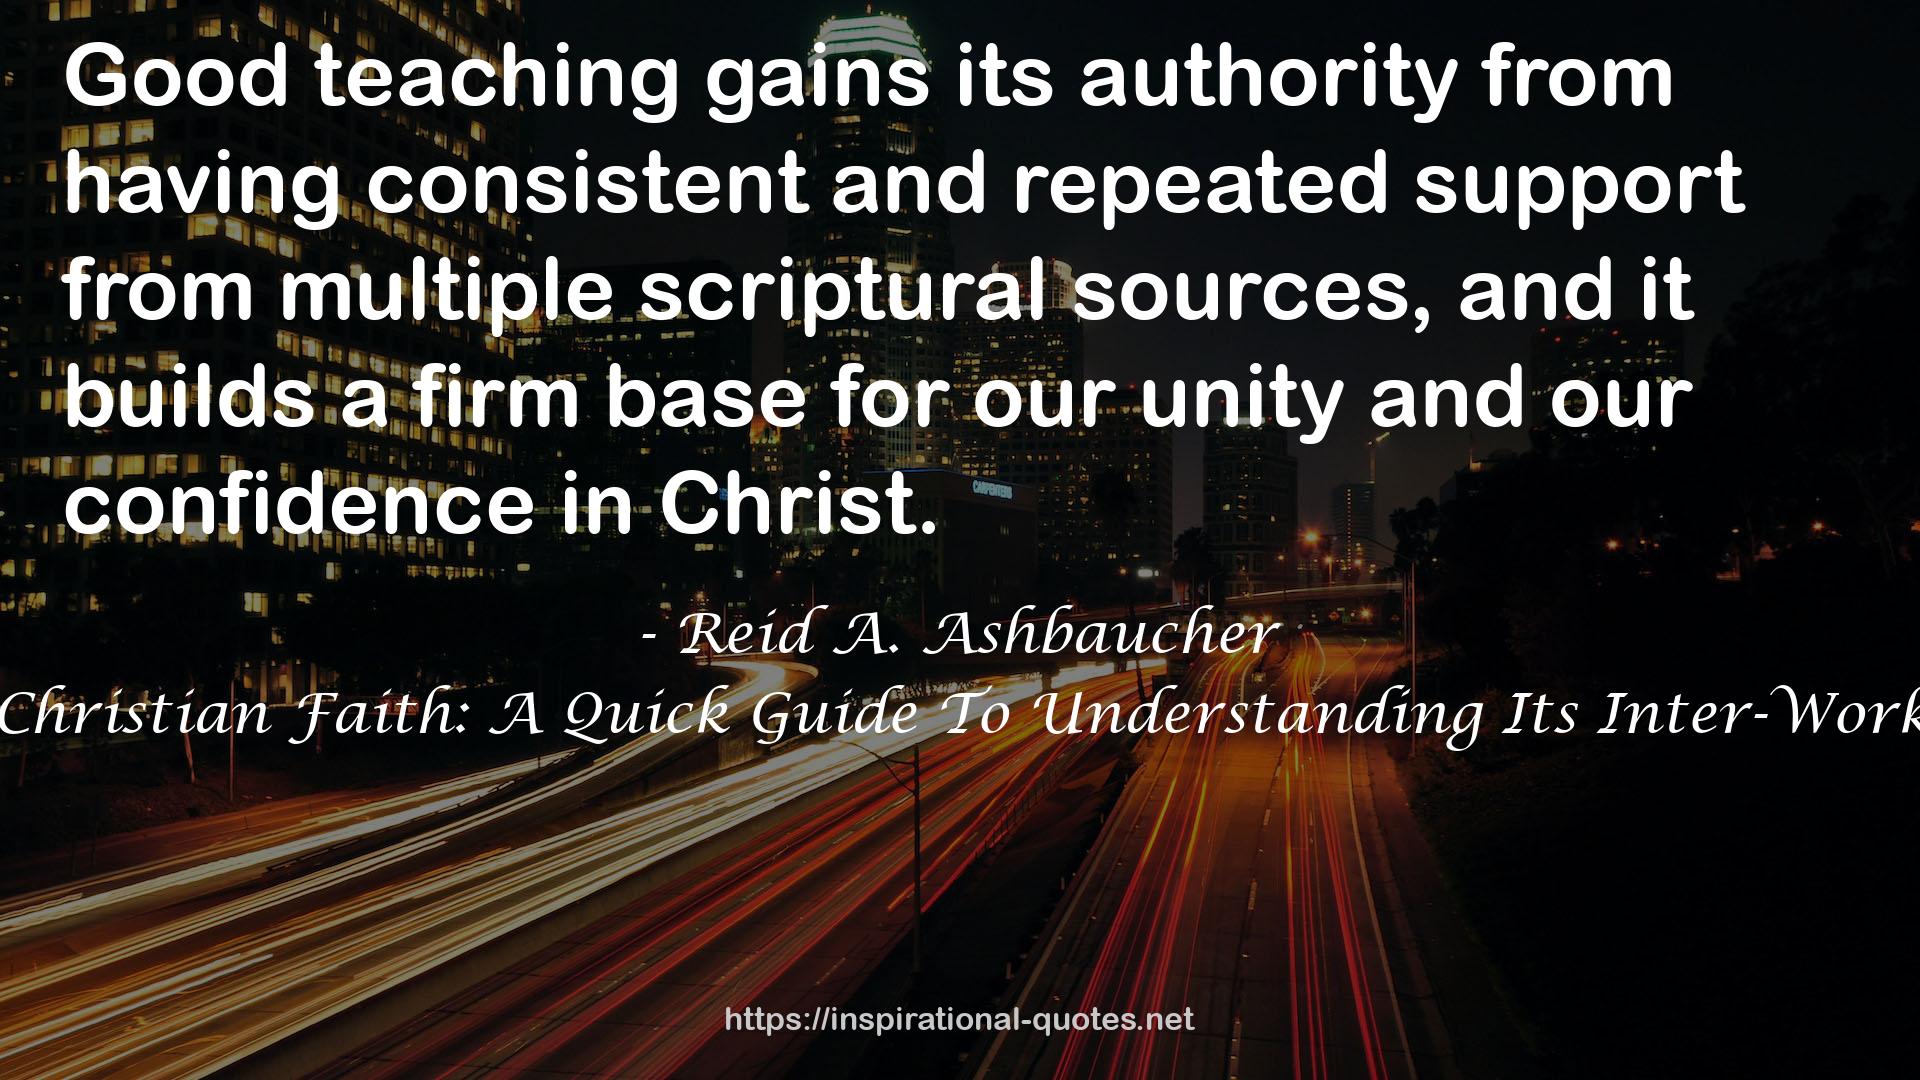 The Christian Faith: A Quick Guide To Understanding Its Inter-Workings QUOTES